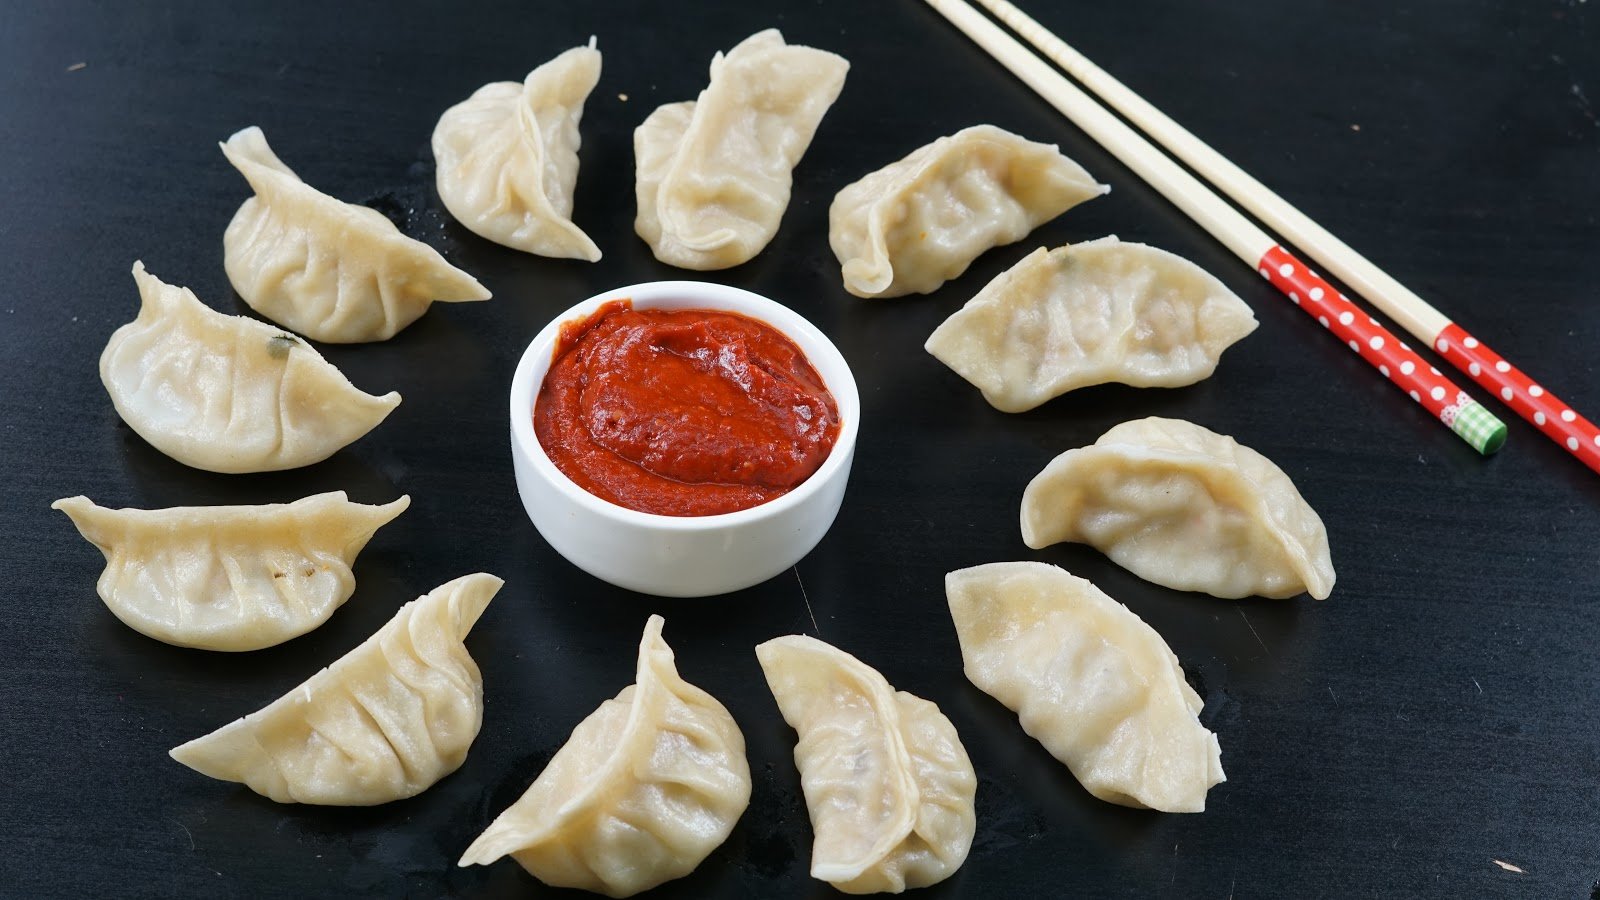 Momos In Delhi – Types, Where To Find and How Much!